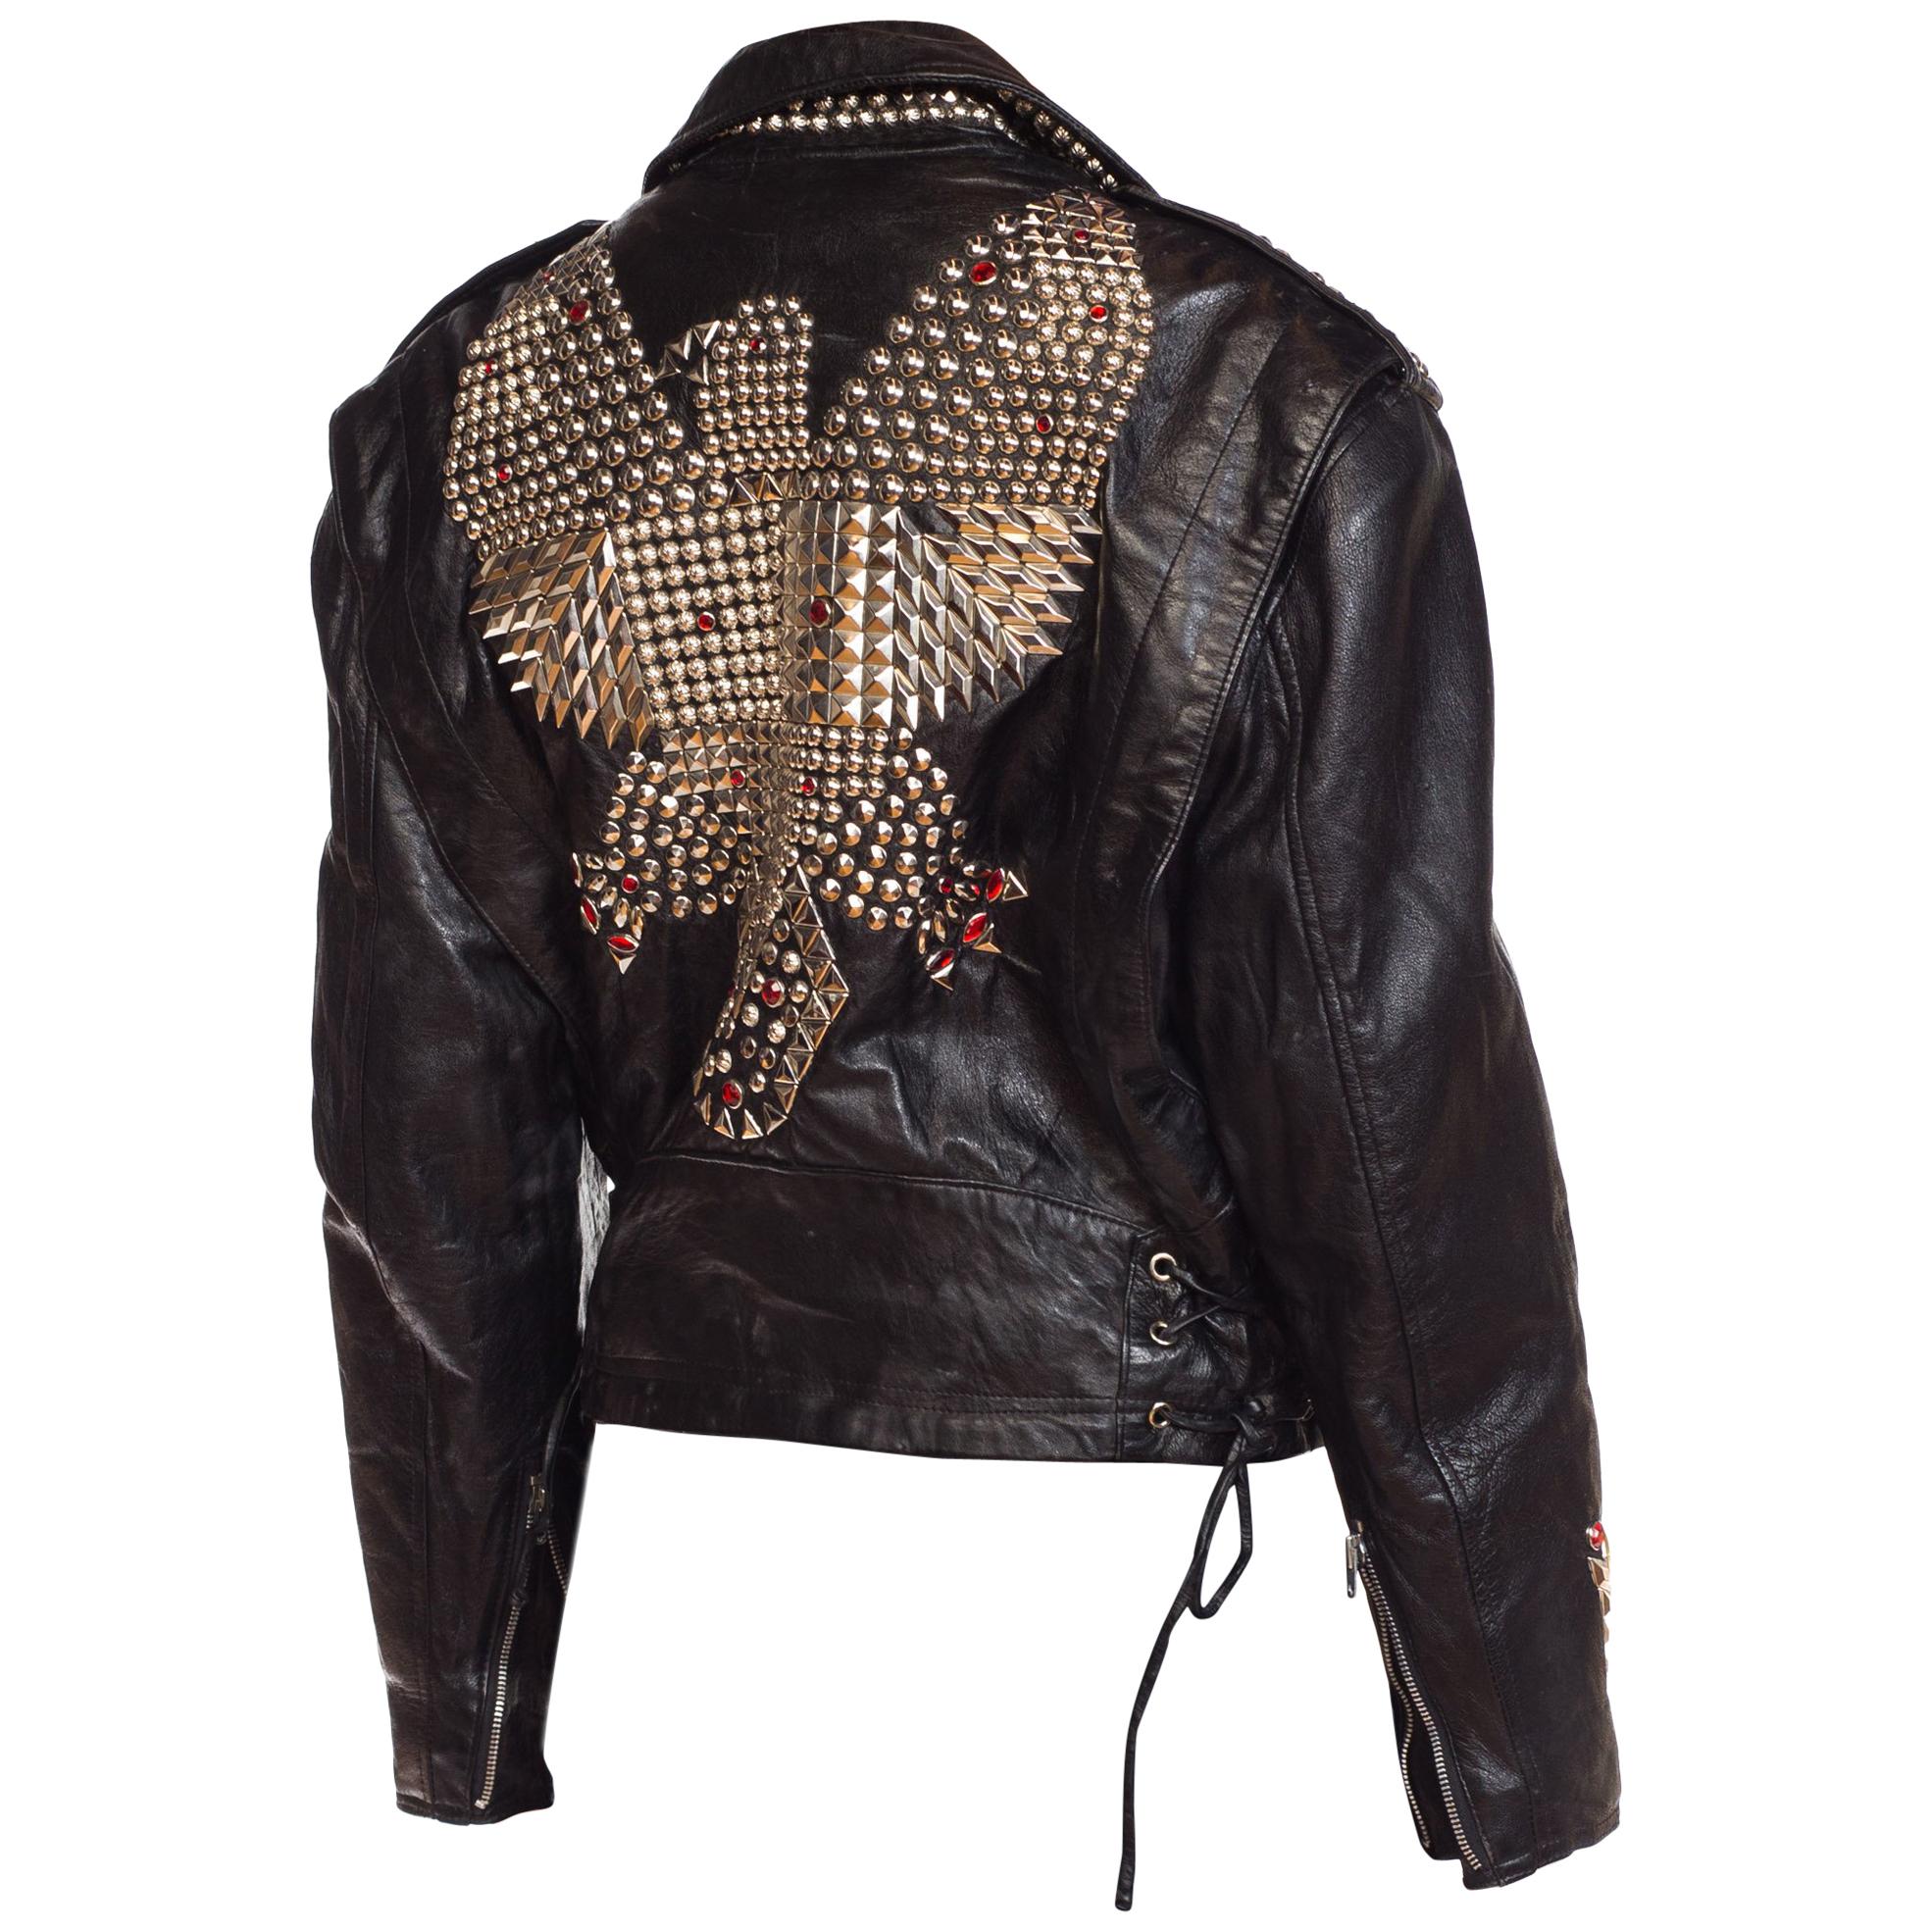 Leather Biker Jacket Covered in Studs & Crystals